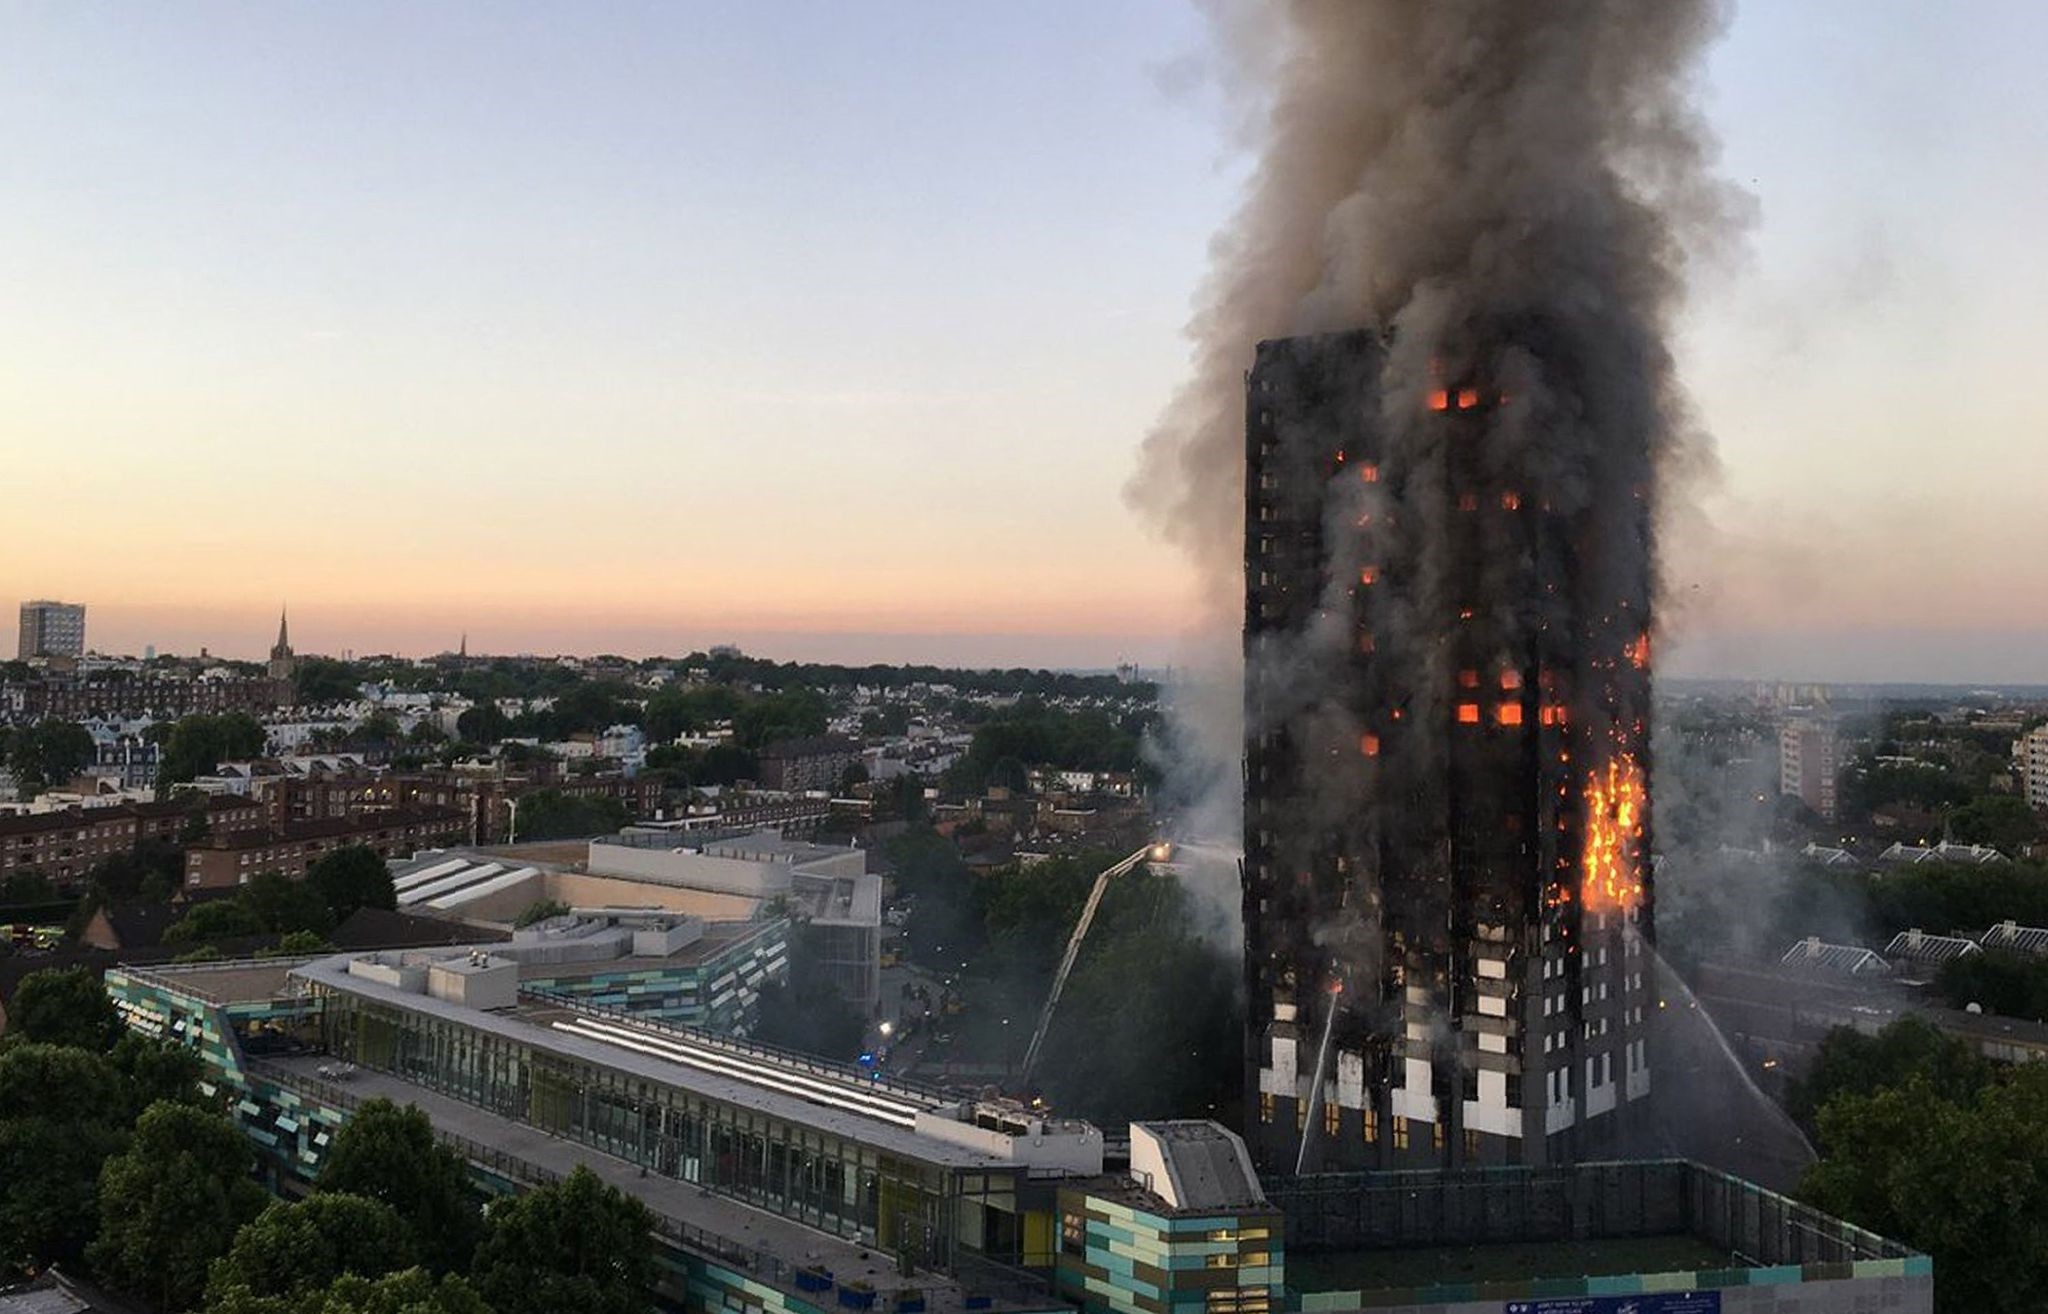 This handout image received by local resident Natalie Oxford early on June 14, 2017 shows flames and smoke coming from a 27-storey block of flats after a fire broke out in west London. (AFP Photo)